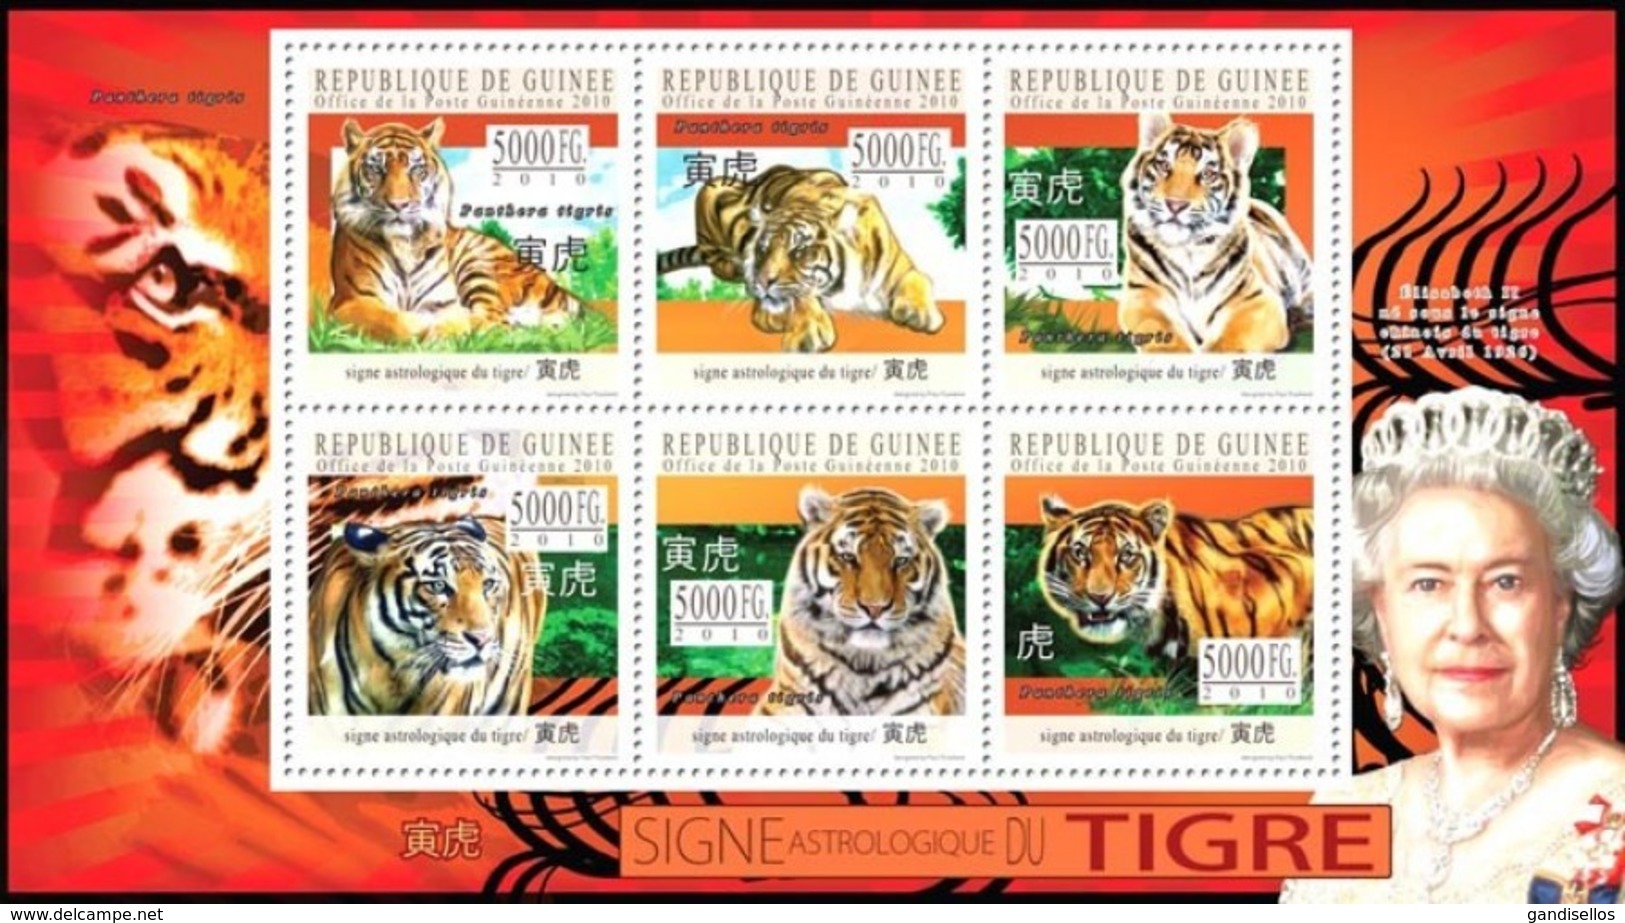 GUINEA 2010 SHEET ASTROLOGICAL SIGN OF THE TIGER SIGNE ASTROLOGIQUE CHINESE HOROSCOPE TIGRE WILD CATS WILDLIFE Gu10403a - Guinee (1958-...)